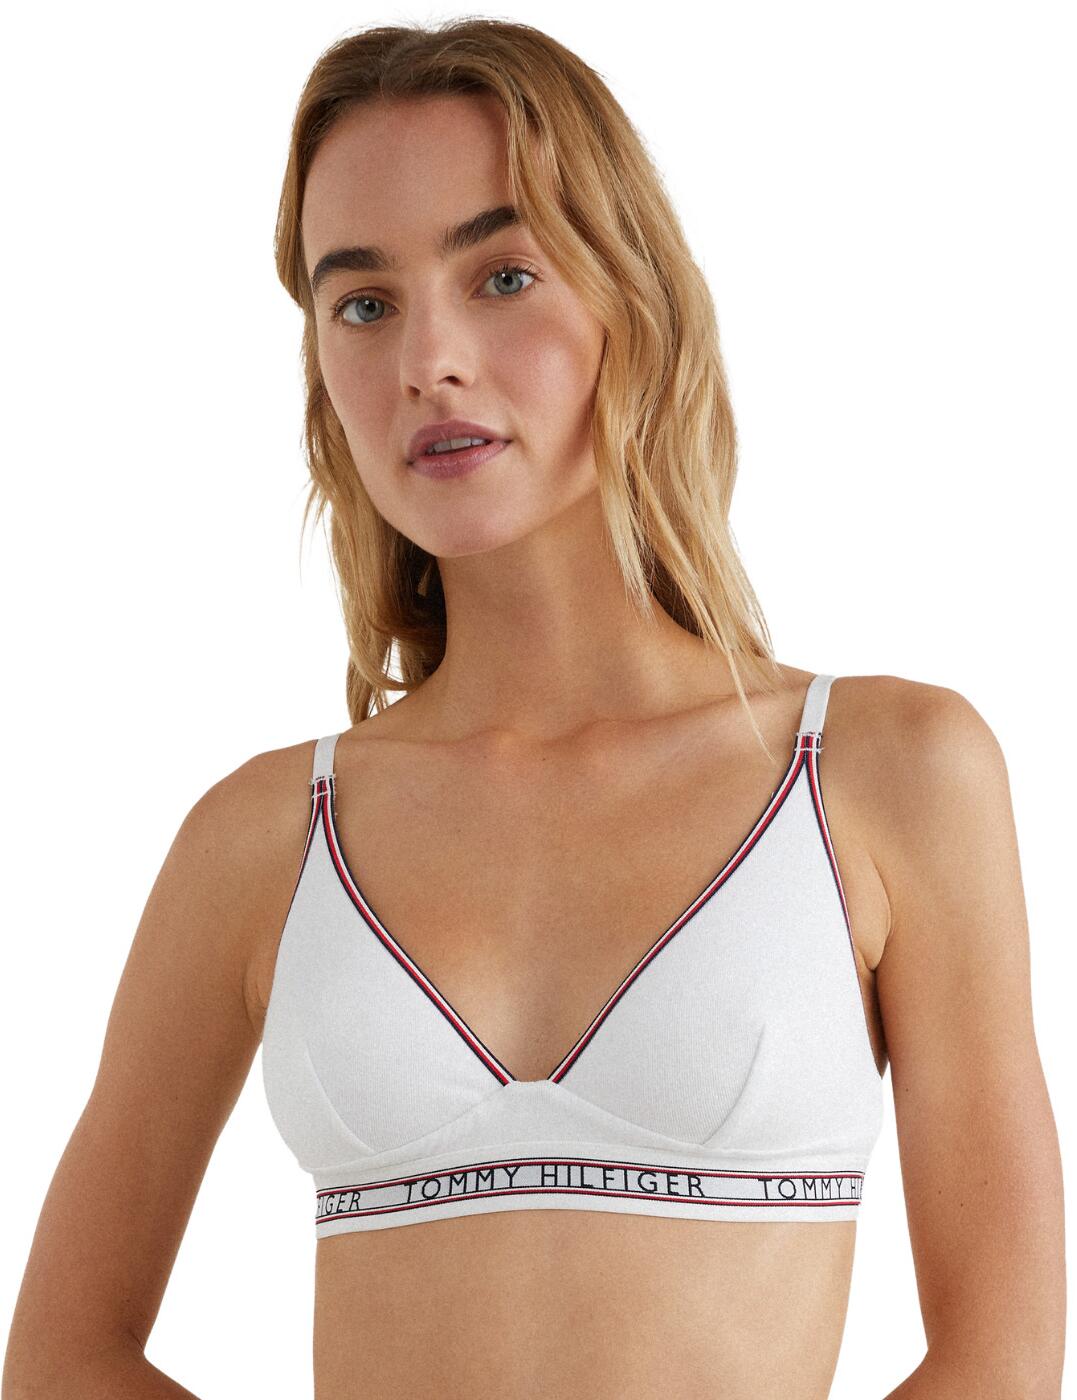 Tommy Hilfiger Hilfiger Classic Unlined Triangle Bra White 